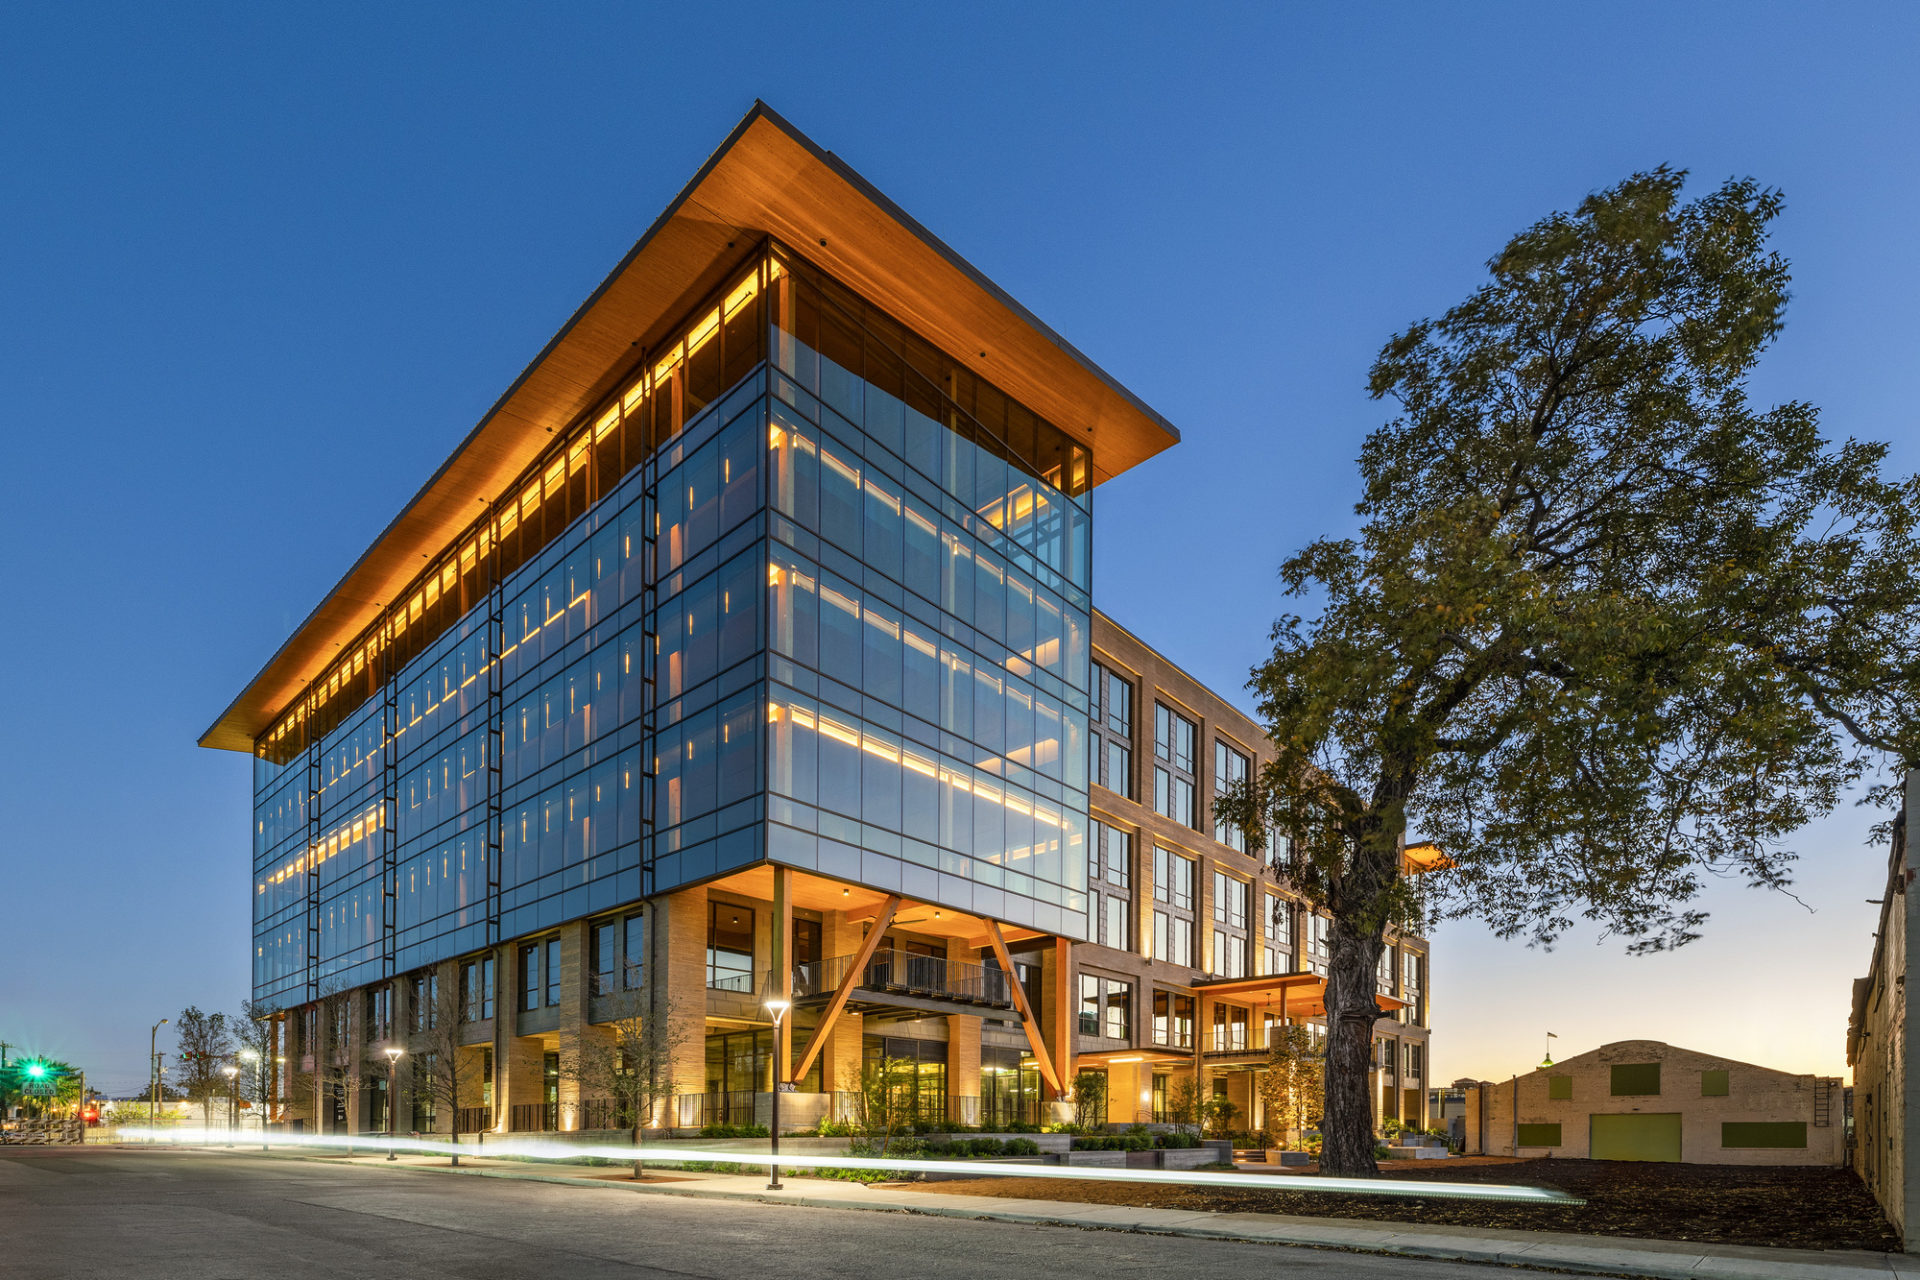 The Soto is Texas' first mass timber office building​, a harbinger of sustainable design and construction that has proved its strength in Europe, Canada and Australia, and more recently, the United States